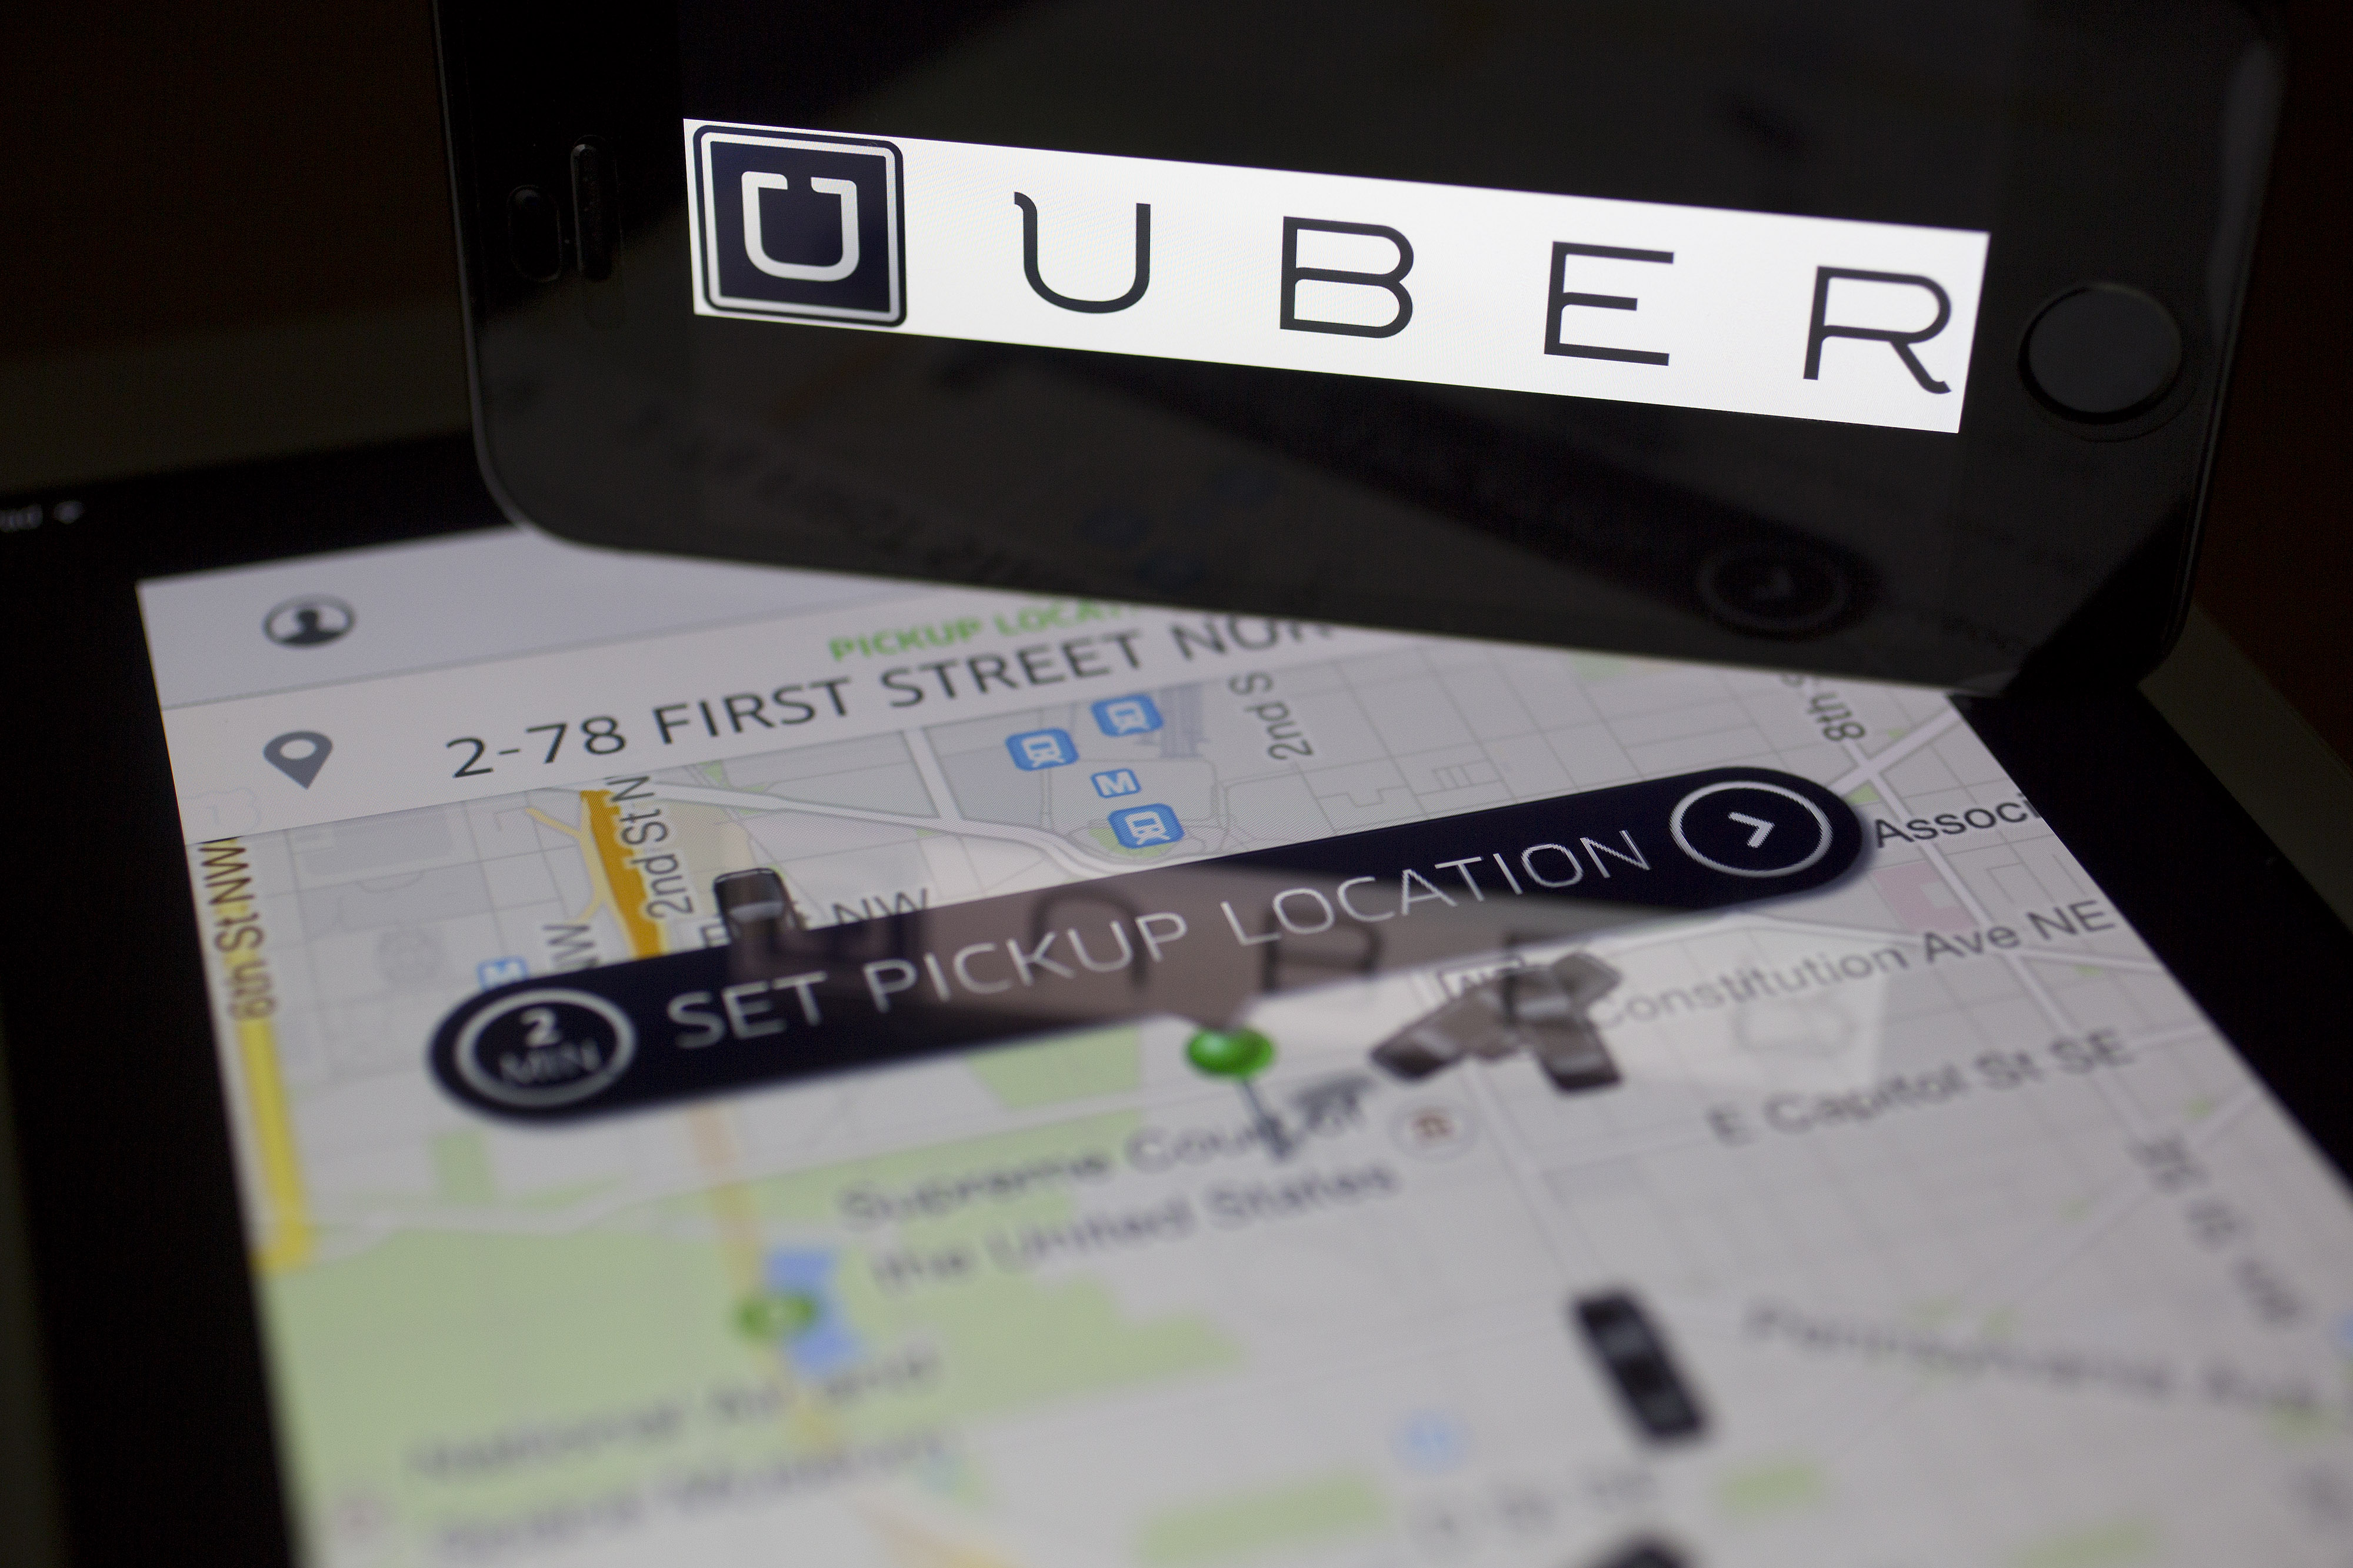 The Uber Technologies Inc. application and logo are displayed on an Apple Inc. iPhone 5s and iPad Air in this arranged photograph in Washington, D.C., U.S., on Wednesday, March 5, 2014.